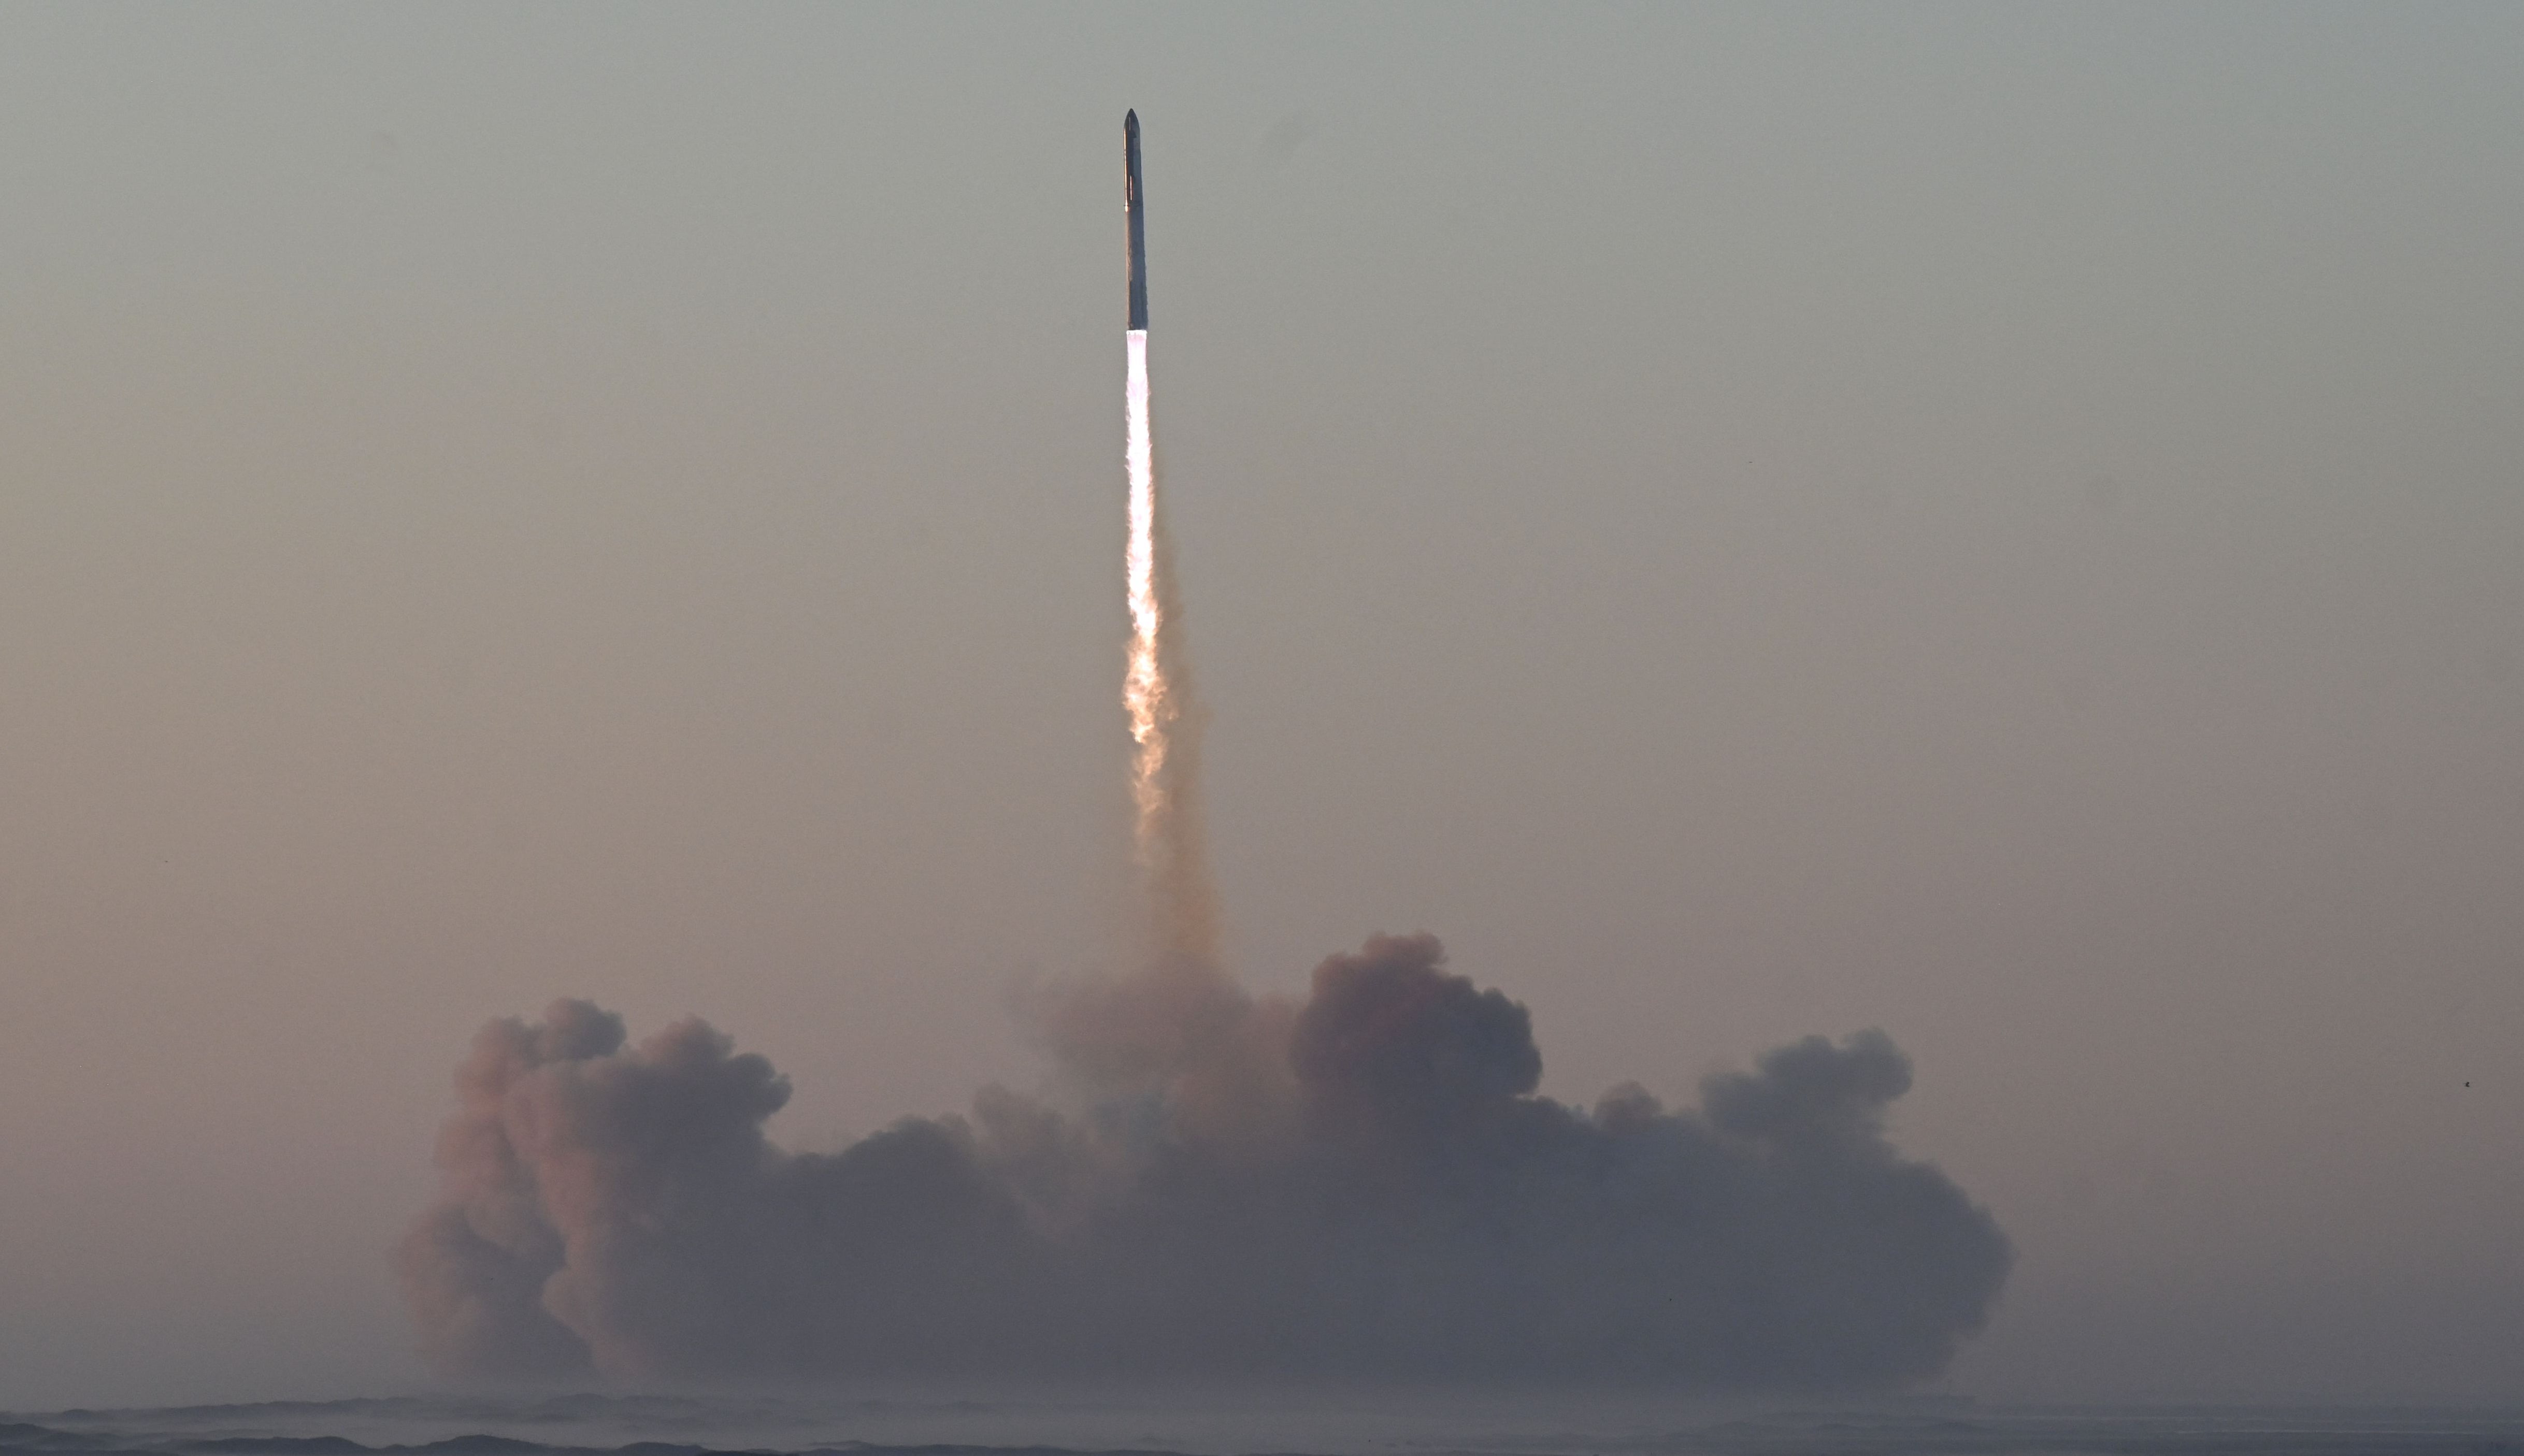 SpaceX’s Starship rocket launches from Starbase during its second test flight in Boca Chica, Texas